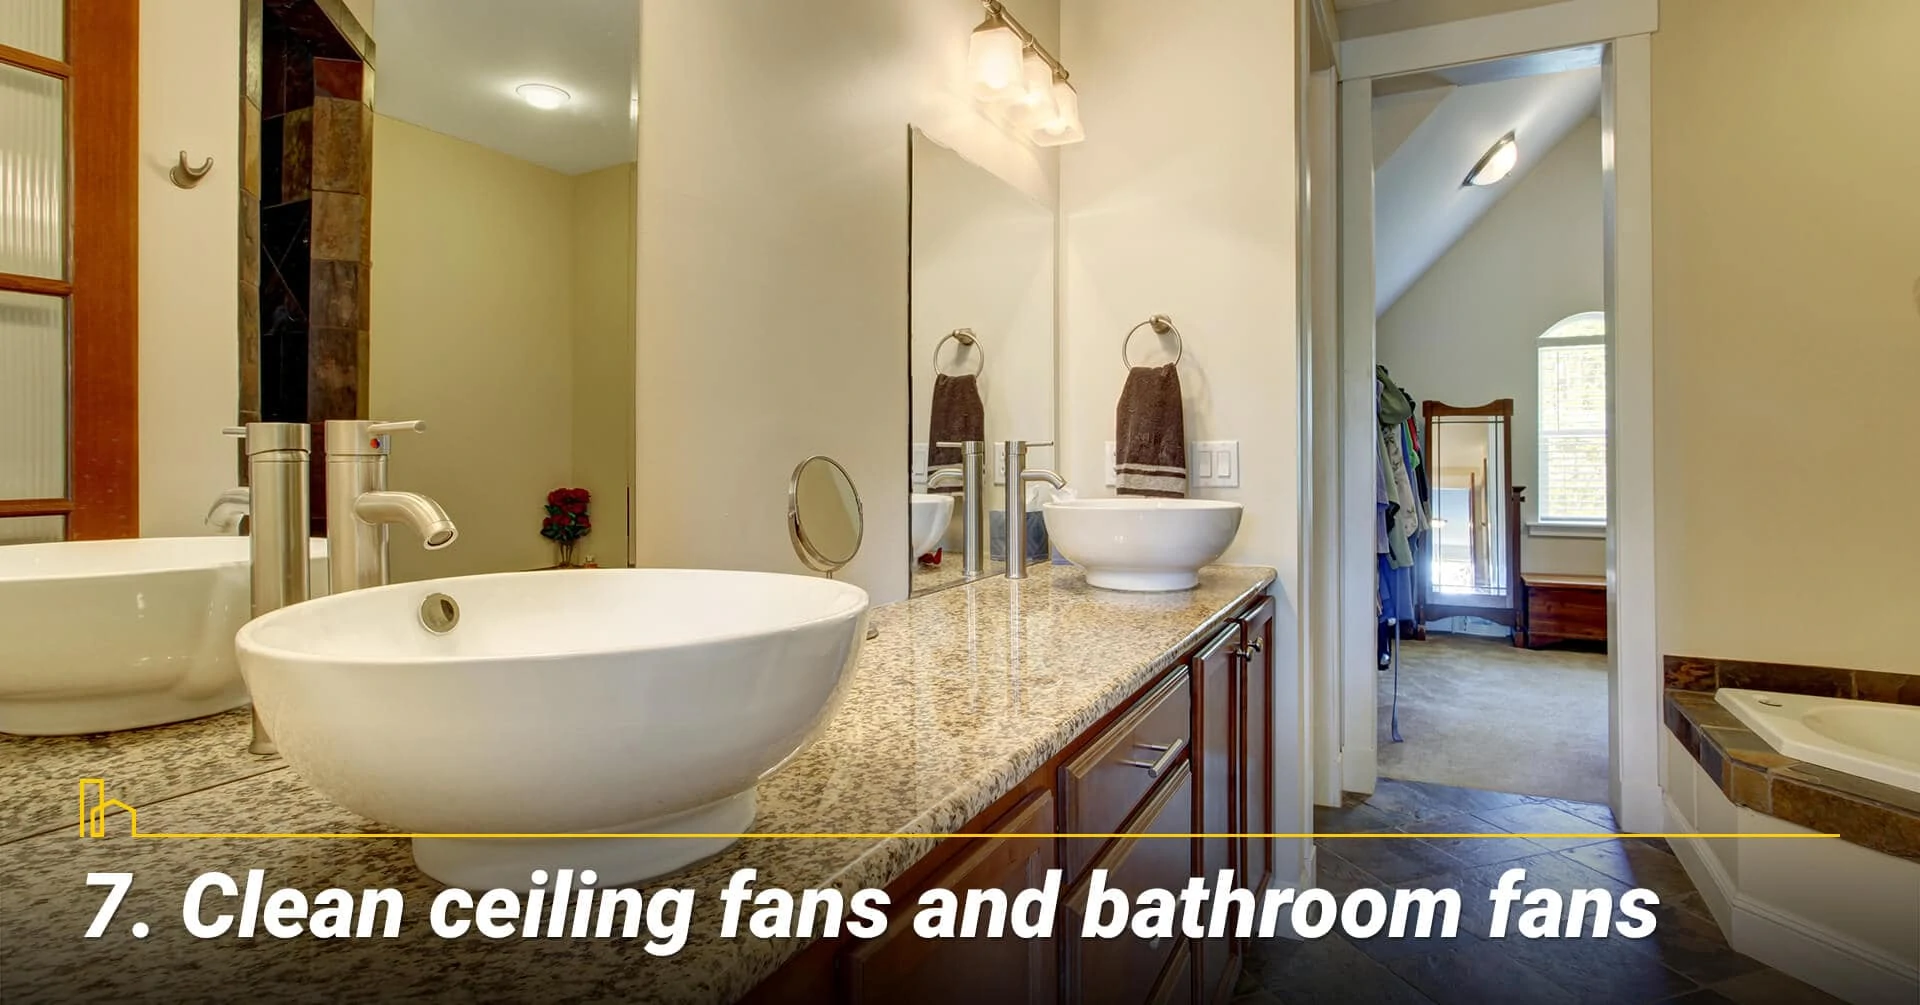 Clean ceiling fans and bathroom fans, keep the fans running